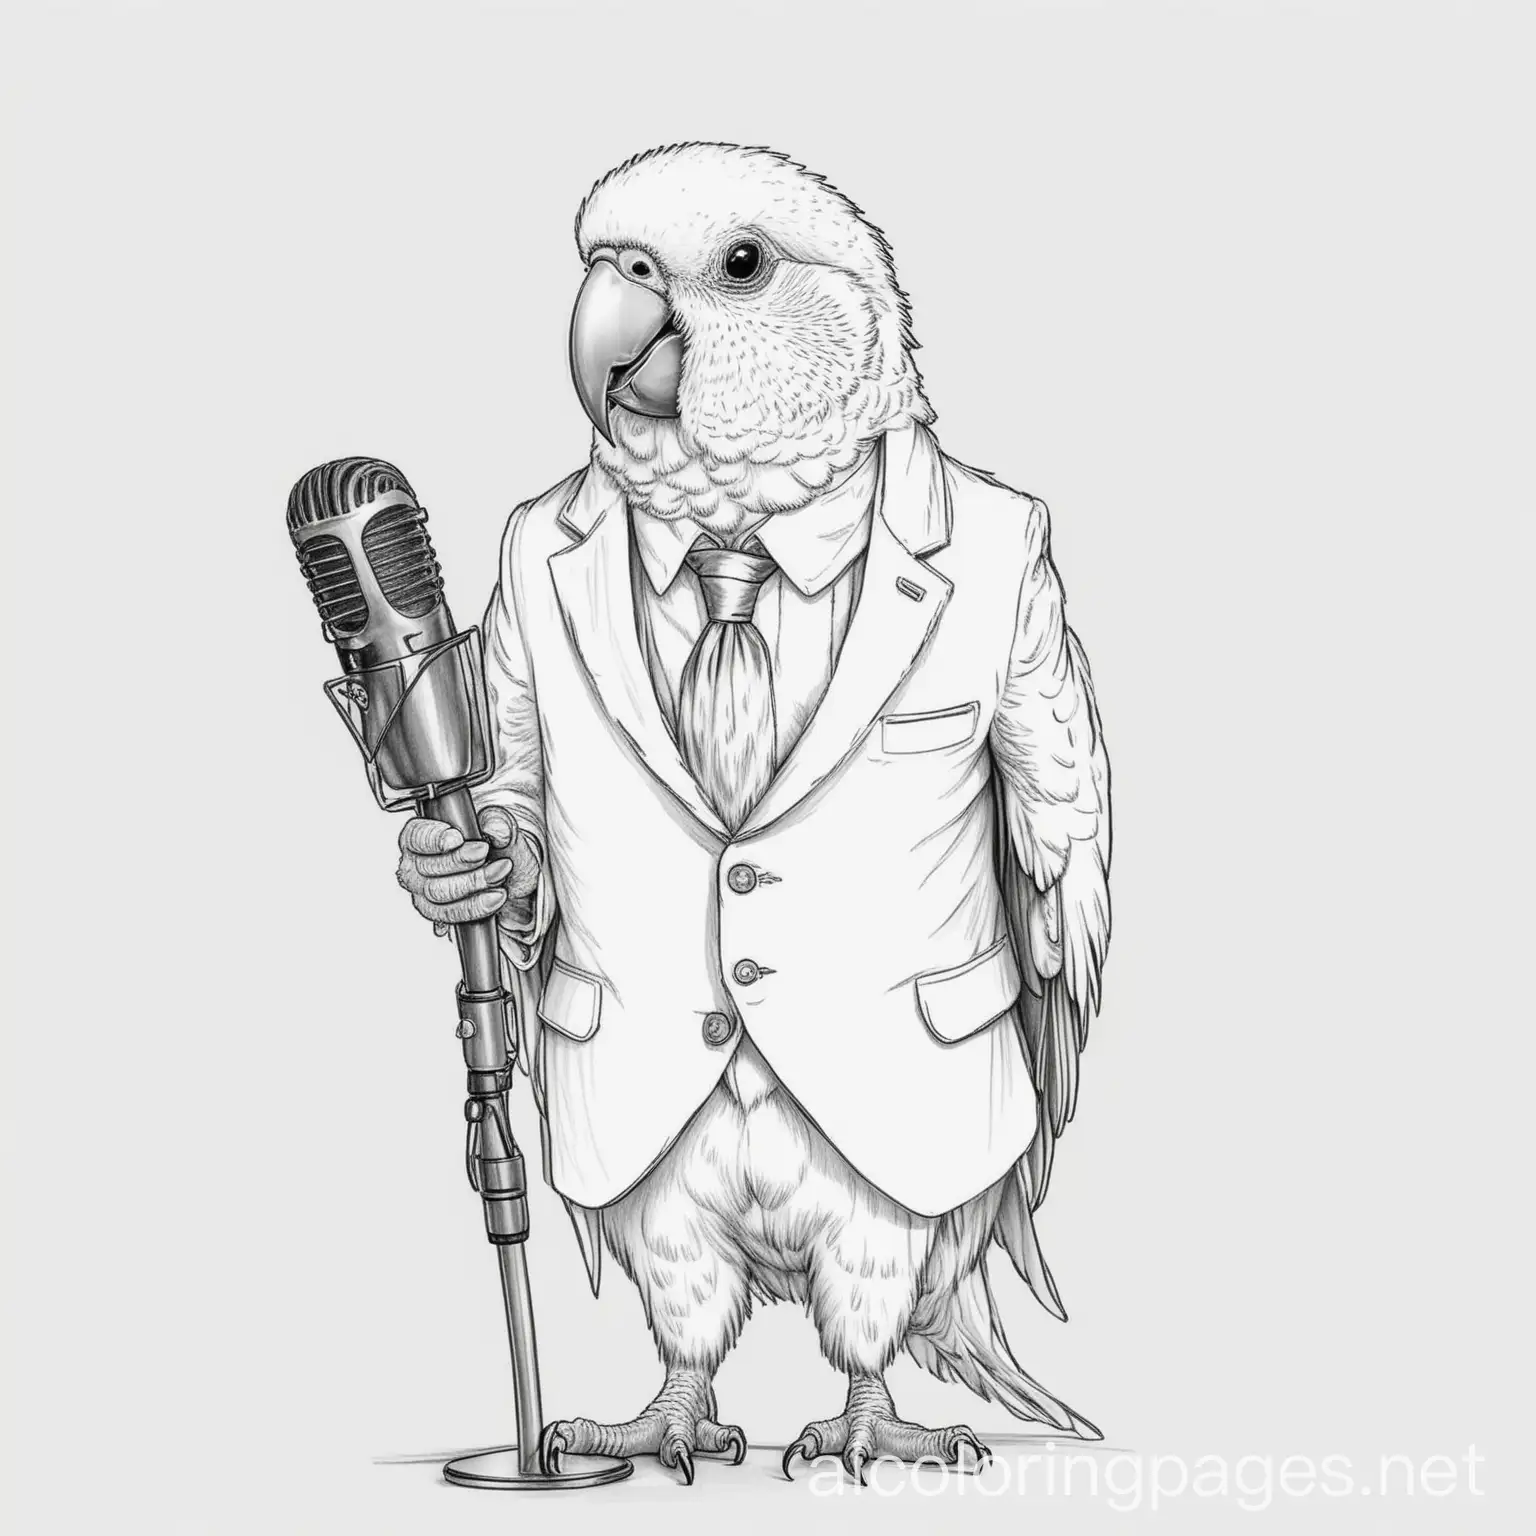 Parakeet in a suit singing with a mic stand, Coloring Page, black and white, line art, white background, Simplicity, Ample White Space. The background of the coloring page is plain white to make it easy for young children to color within the lines. The outlines of all the subjects are easy to distinguish, making it simple for kids to color without too much difficulty